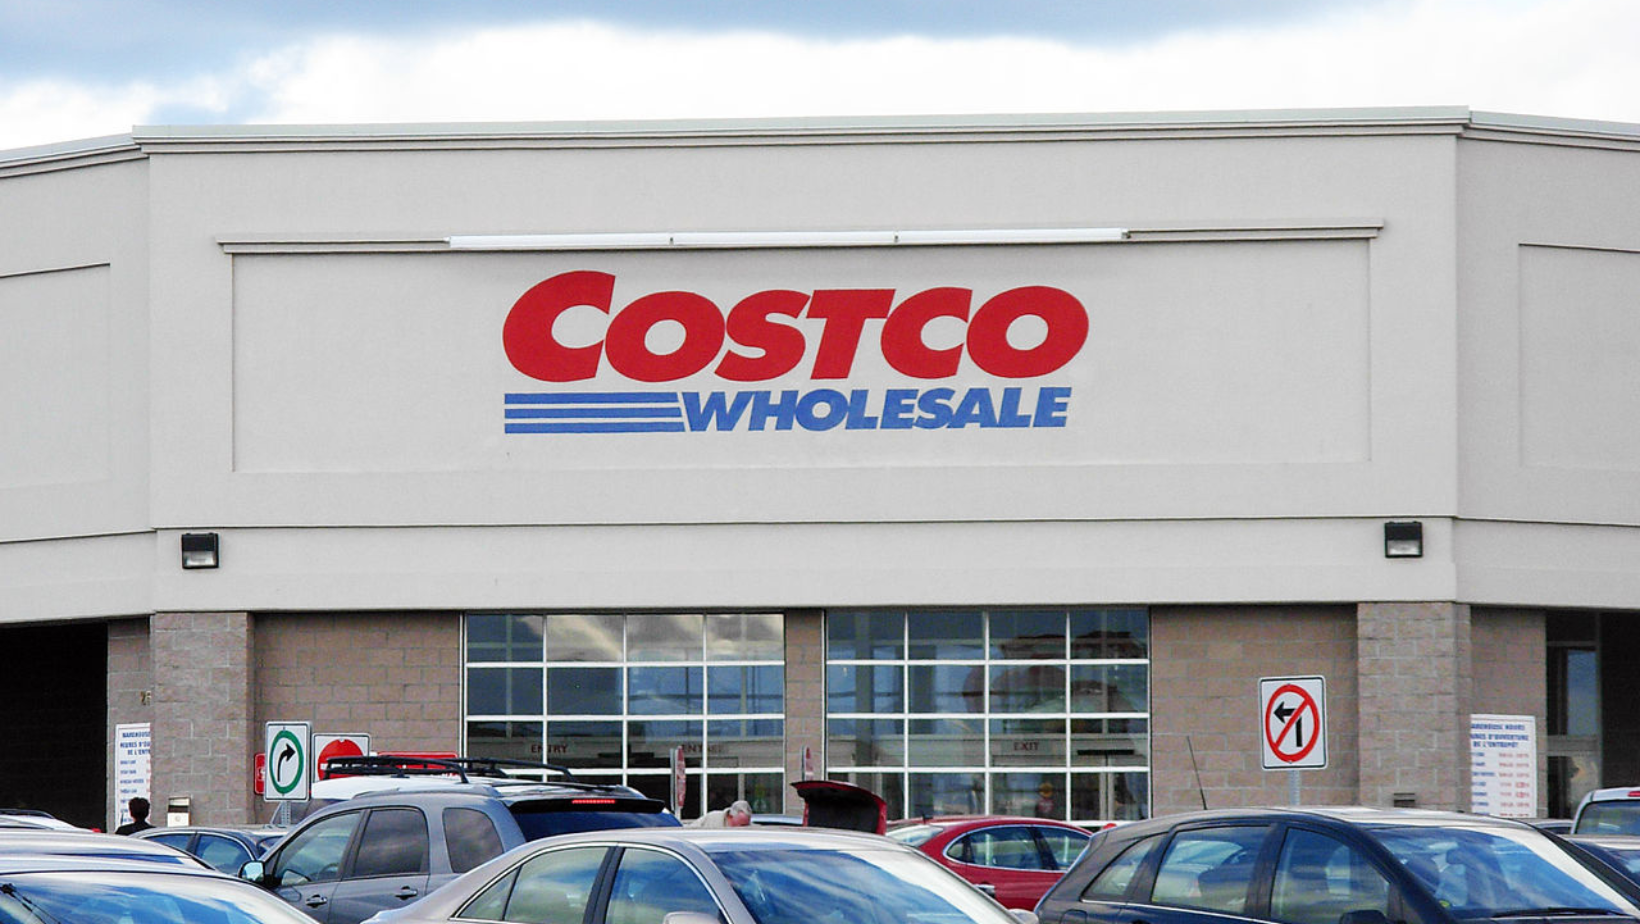 San Jose Community Battles Proposed Costco Warehouse Over Traffic and